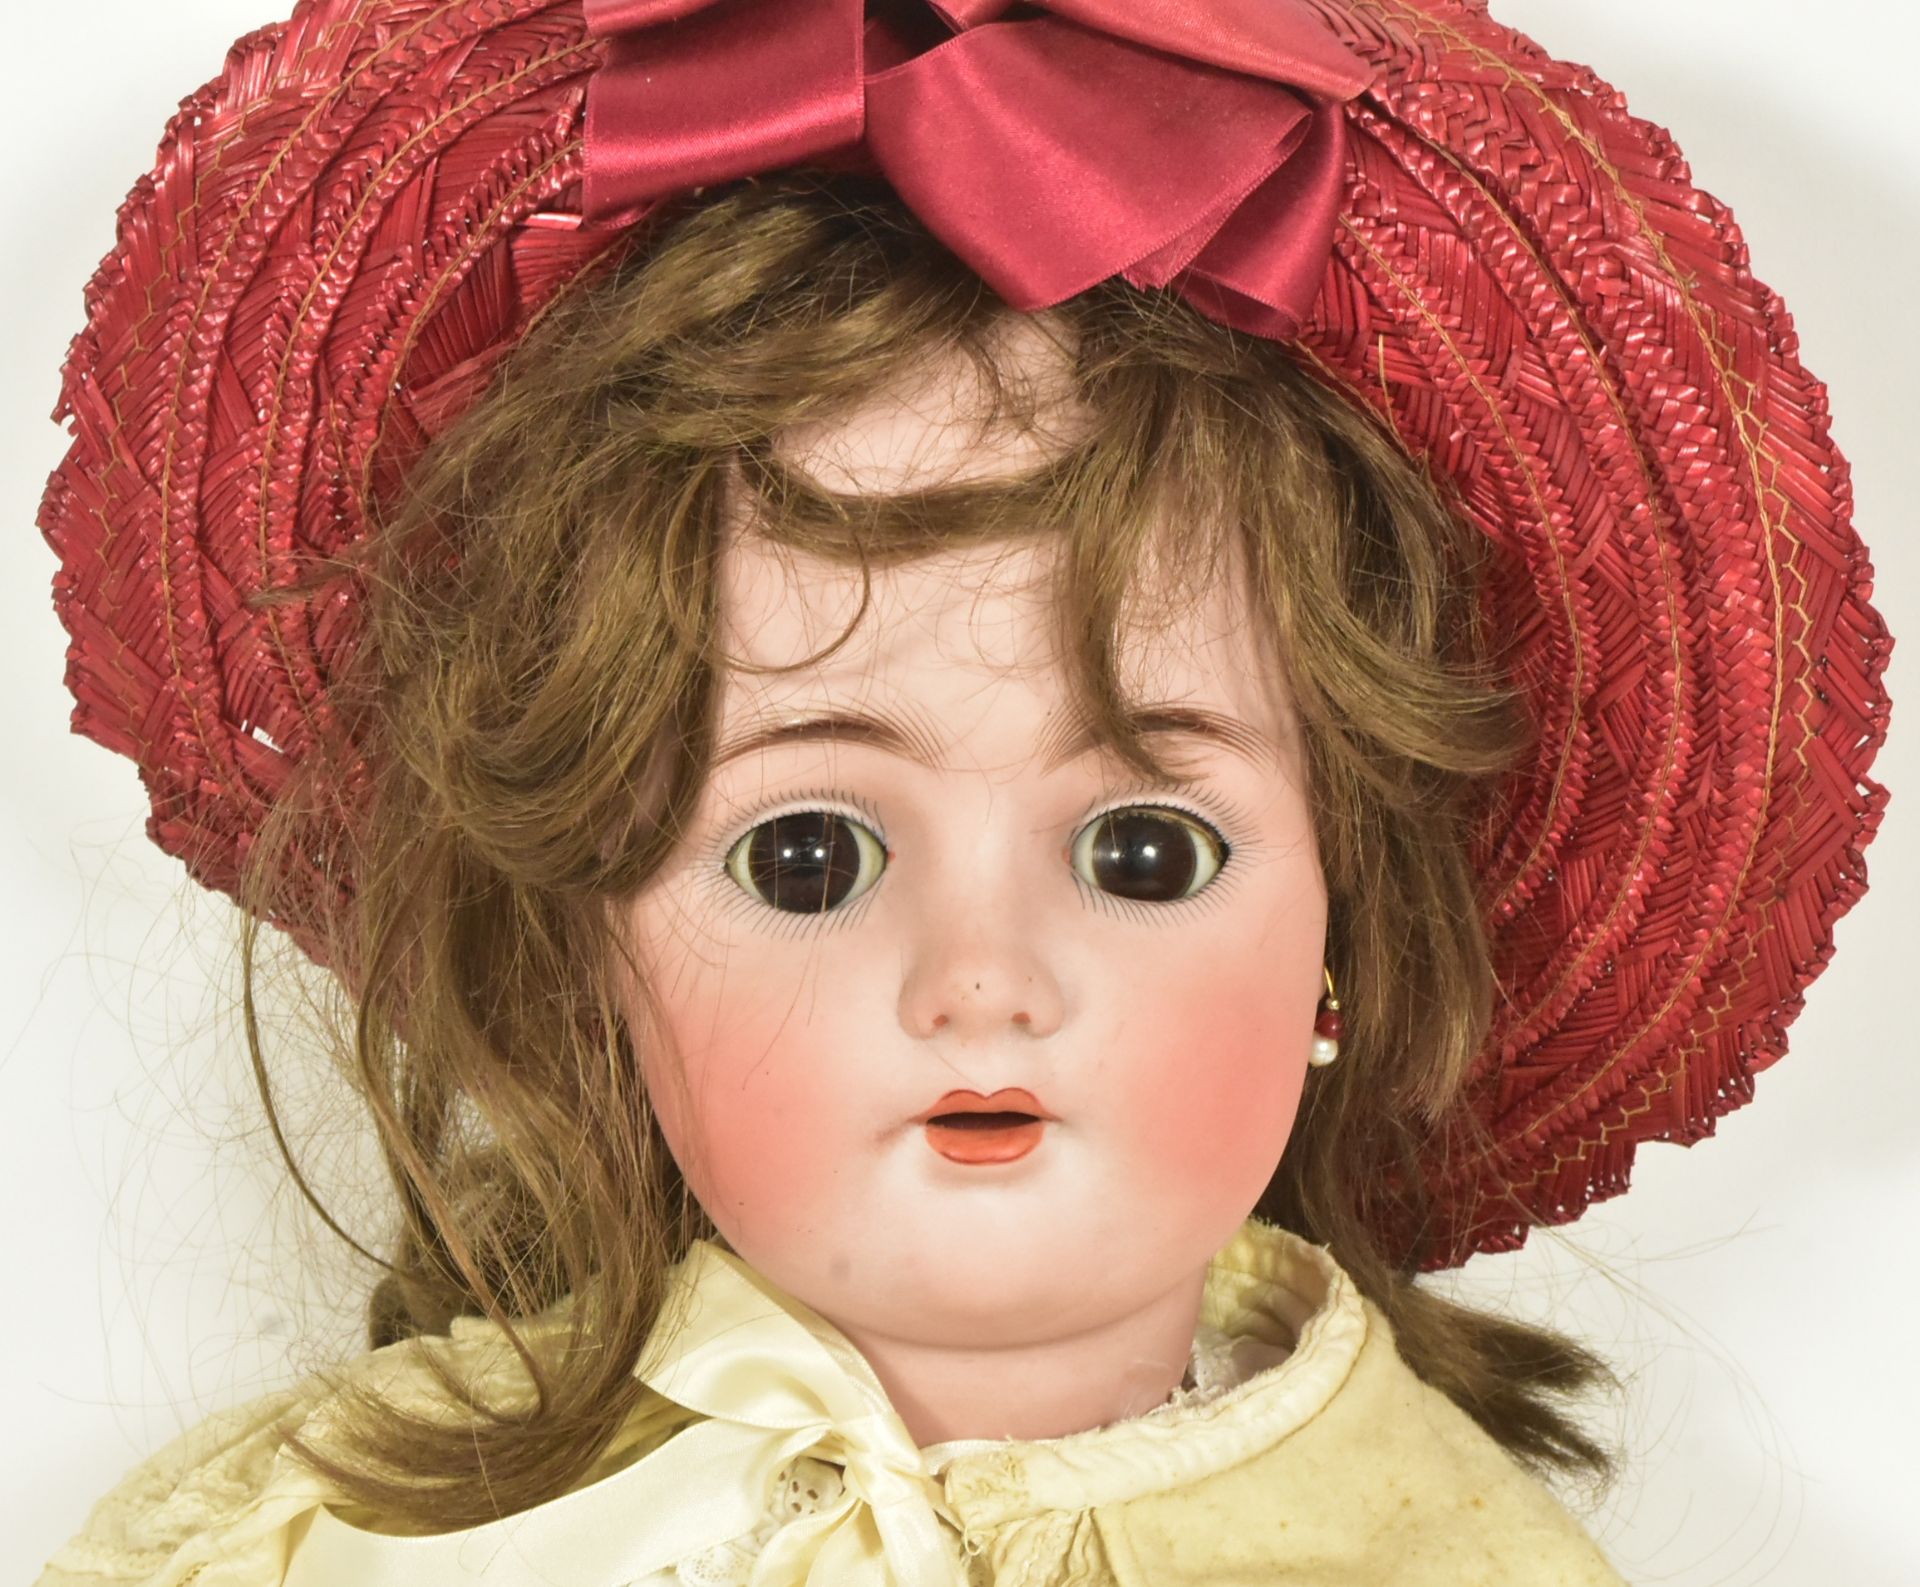 DOLLS - GERMAN BISQUE HEADED DOLL - Image 2 of 5